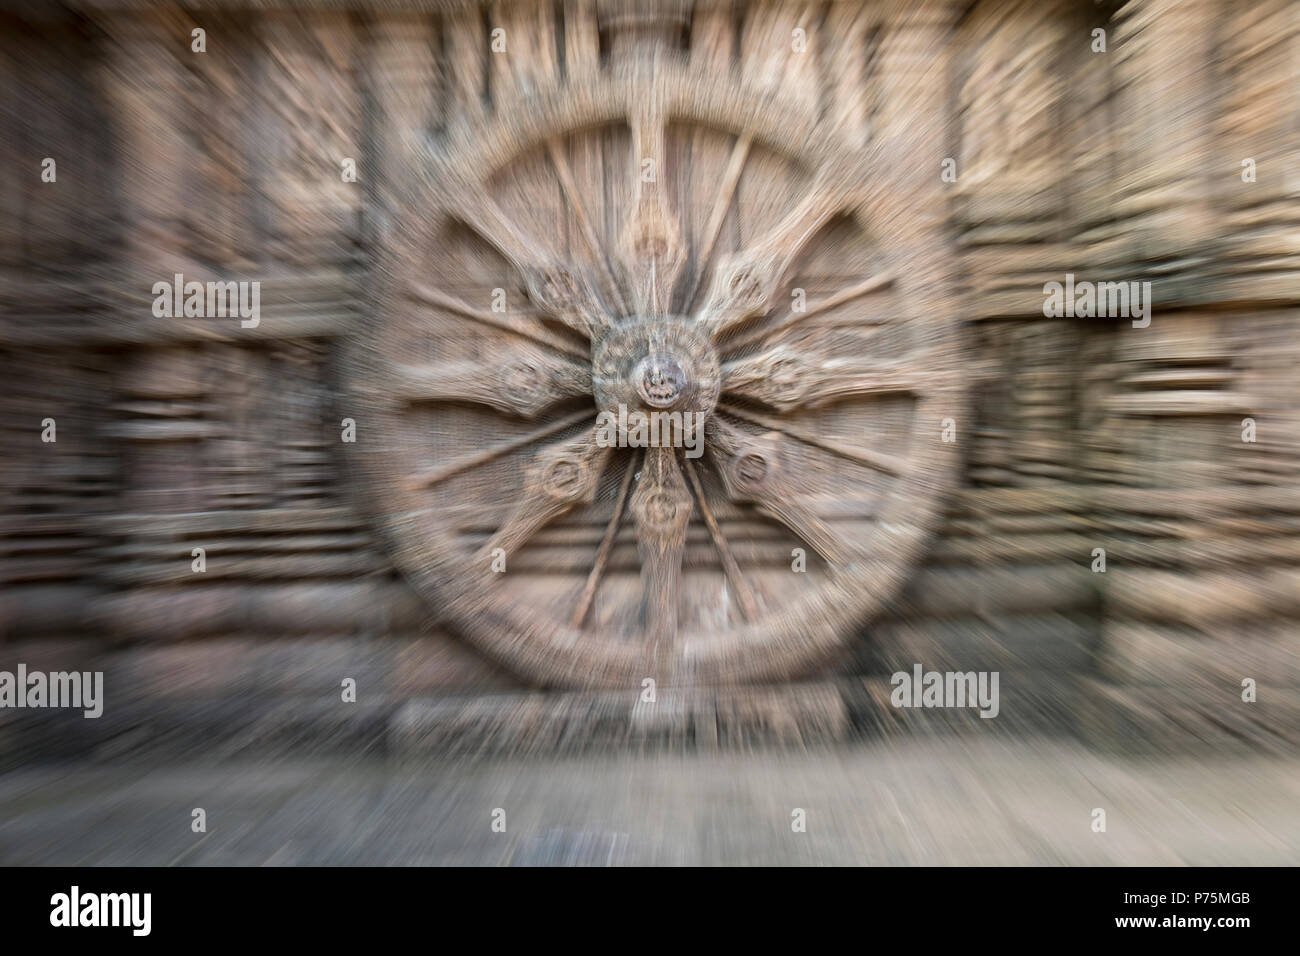 The image of Wheel of Chariot in motion at Konark Sun Temple in Odisha, India Stock Photo